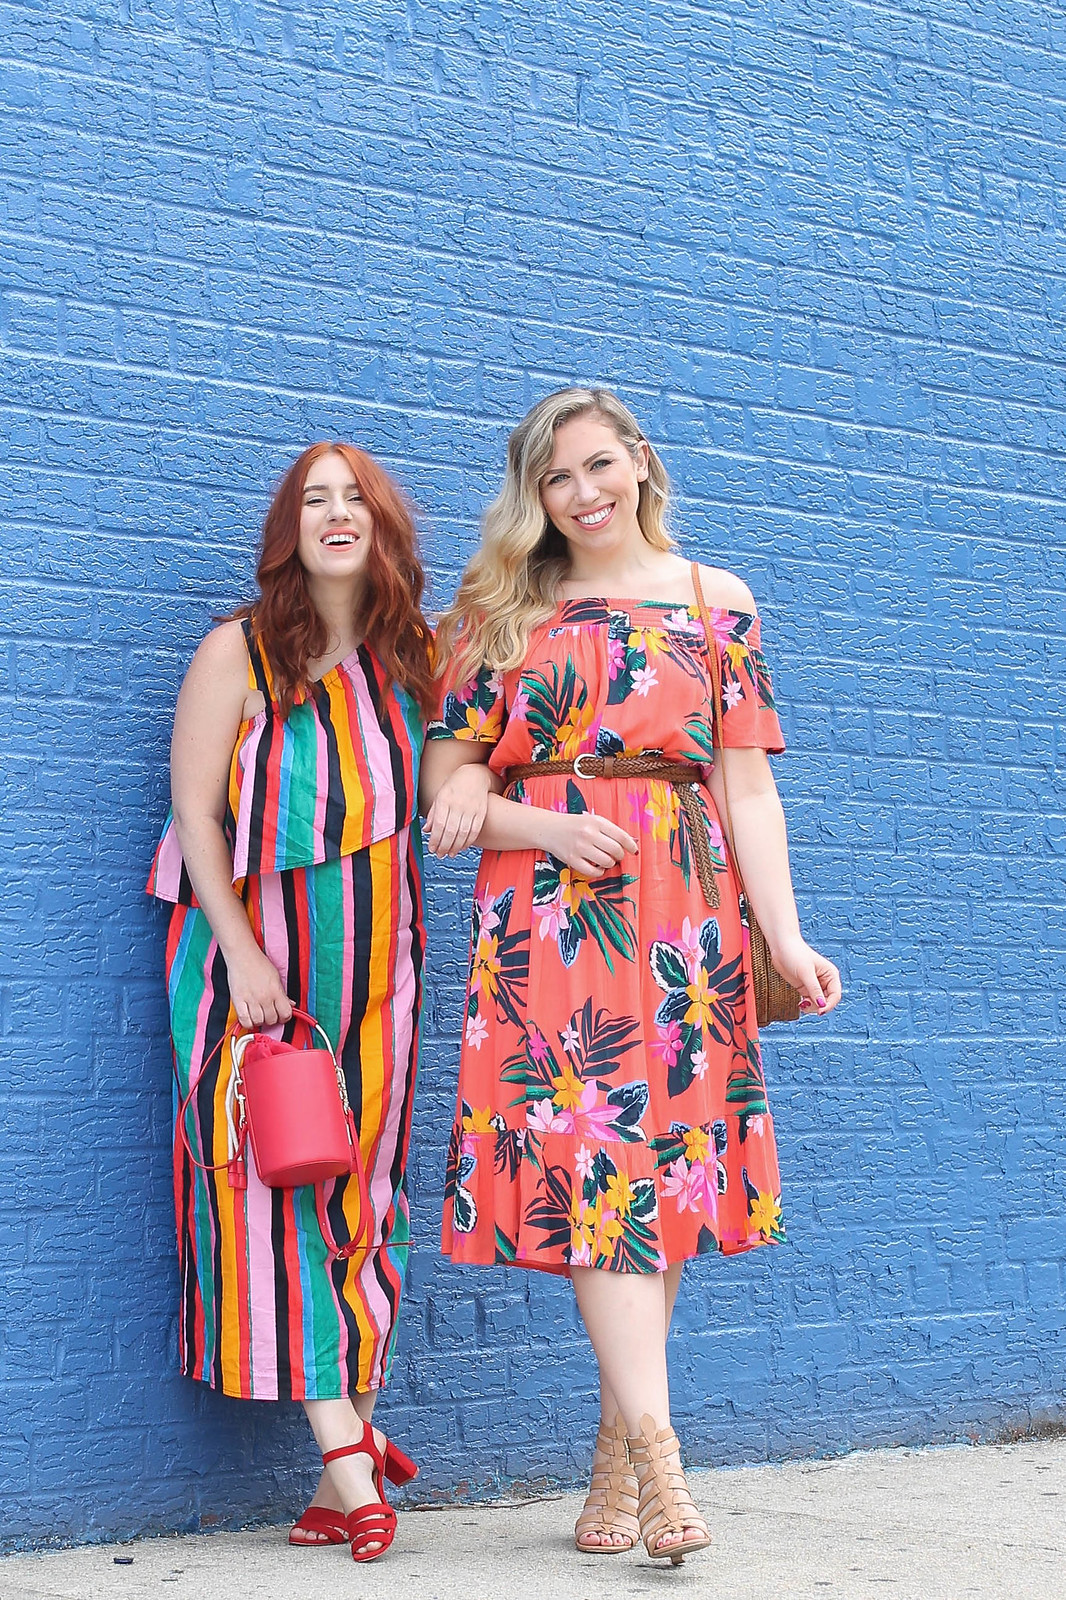 Colorful Printed Summer Outfit Inspiration Under $40 Style Fashion Bold Bright Blogger Friends Blue Brick Wall NYC